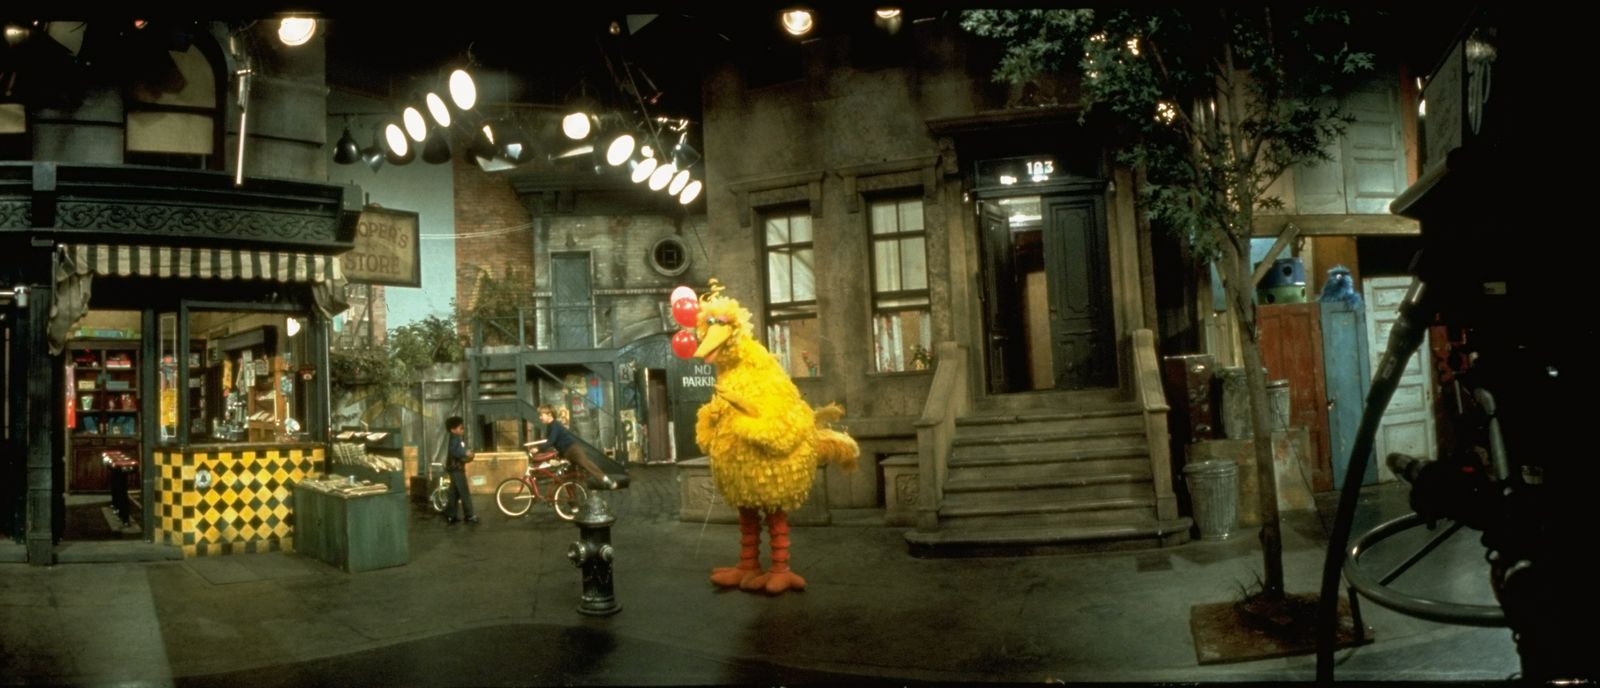 The Unmistakable Black Roots of 'Sesame Street